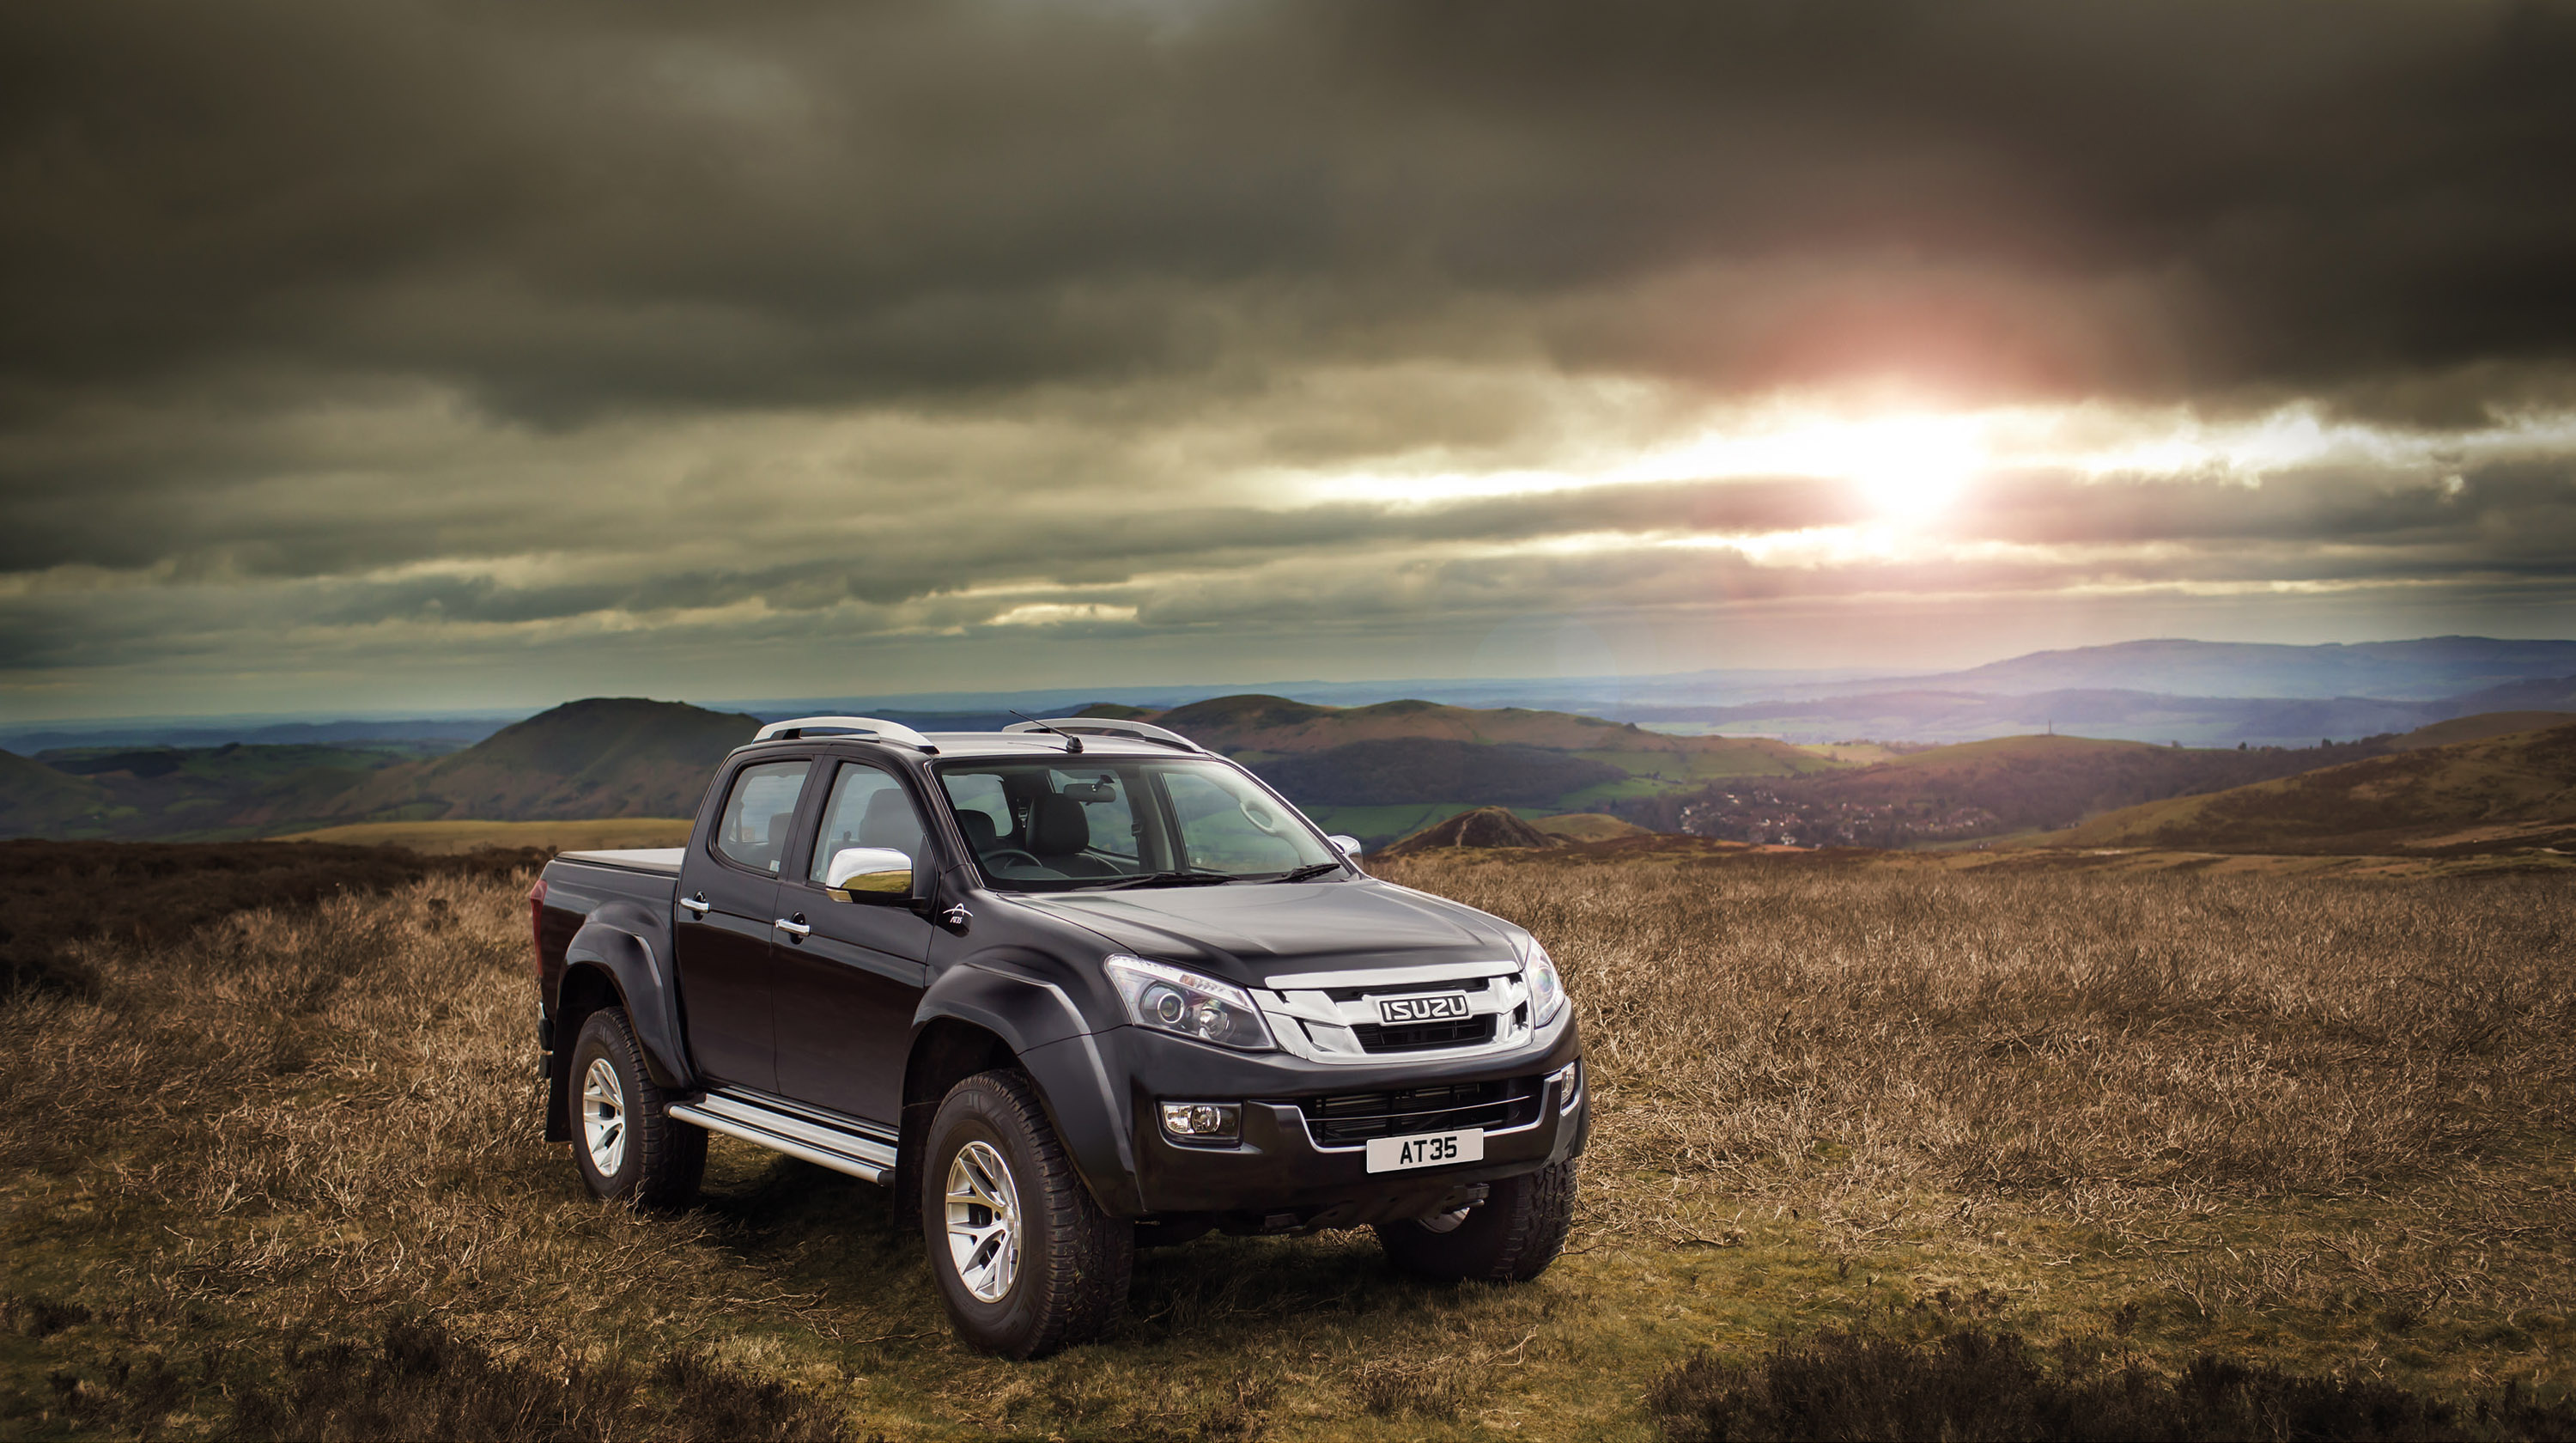 ISUZU D-MAX, Off-road power, Tough and rugged, Picture-perfect, 3000x1680 HD Desktop